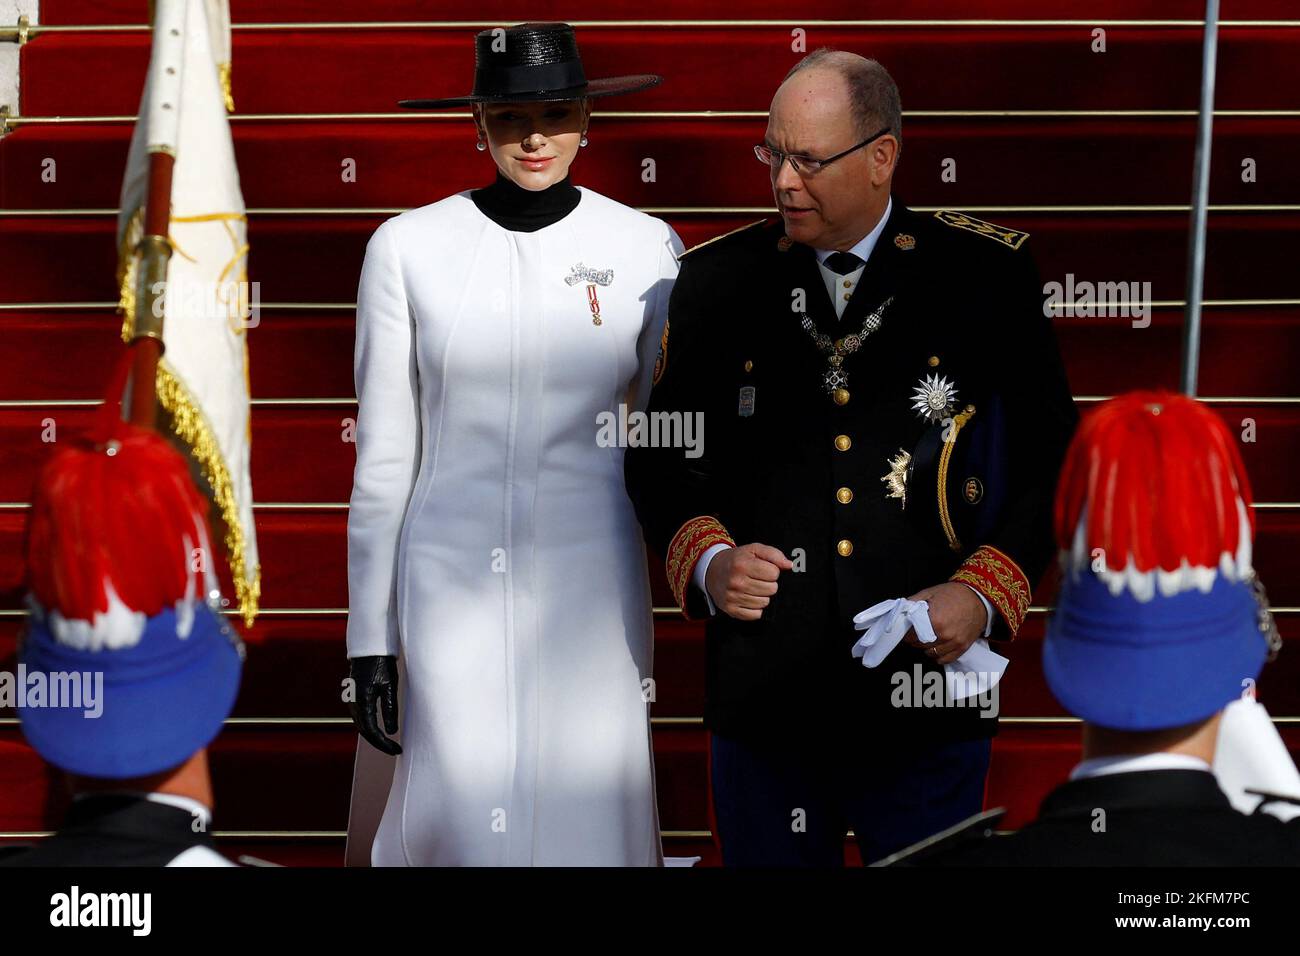 Prince Albert II of Monaco and Princess Charlene leave after a mass at Monaco Cathedral during the celebrations marking Monaco's National Day, November 19, 2022. REUTERS/Eric Gaillard Stock Photo